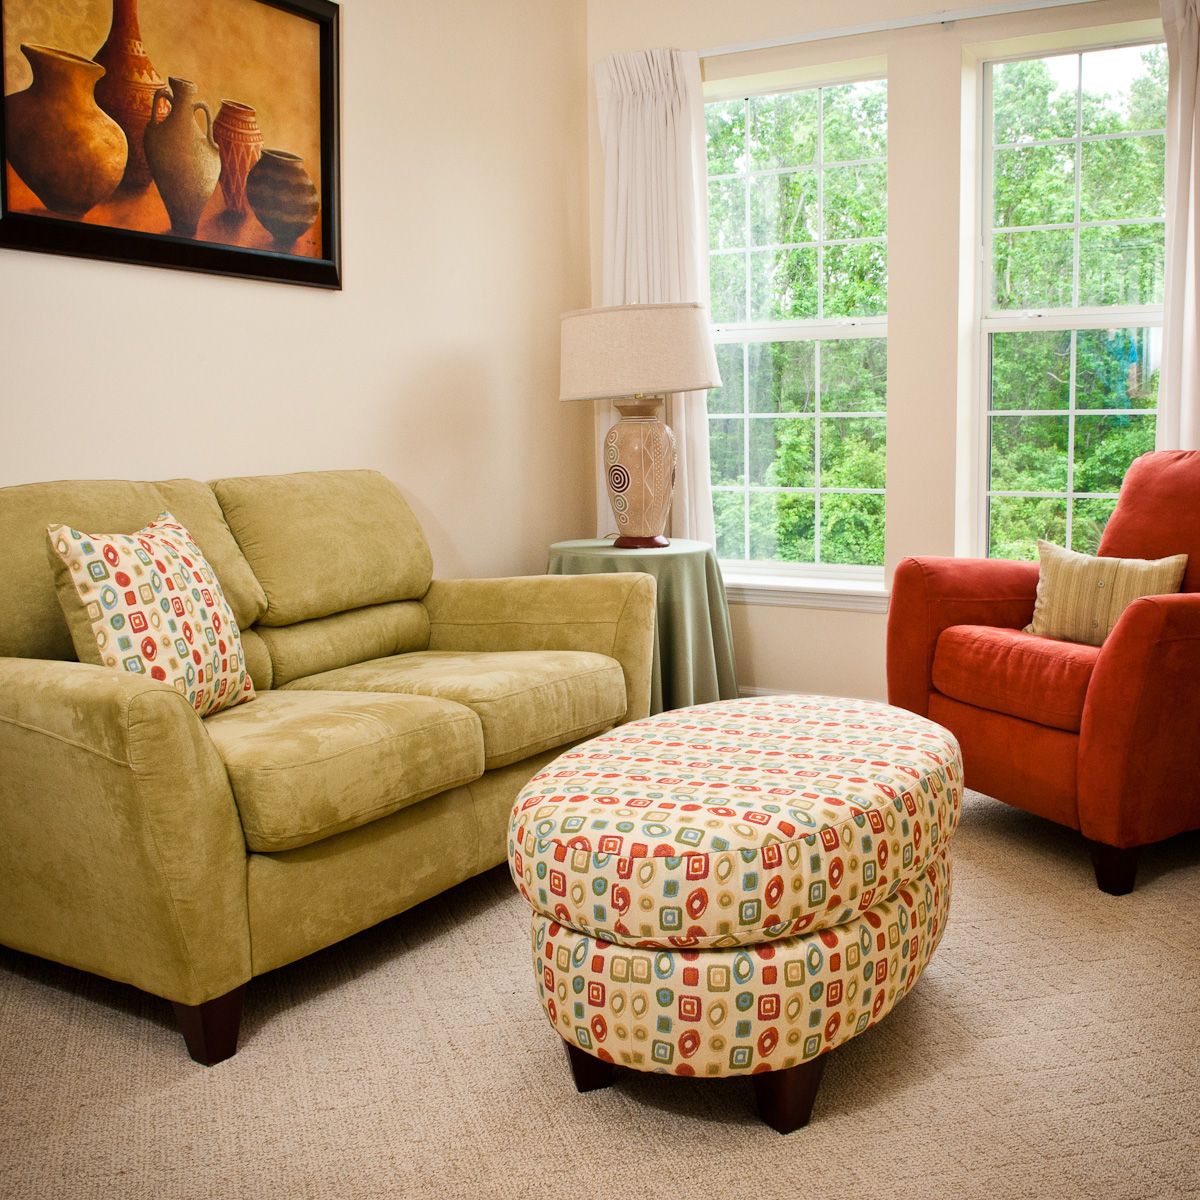 Interior view of Spring Hills Middletown senior living community featuring modern furniture.